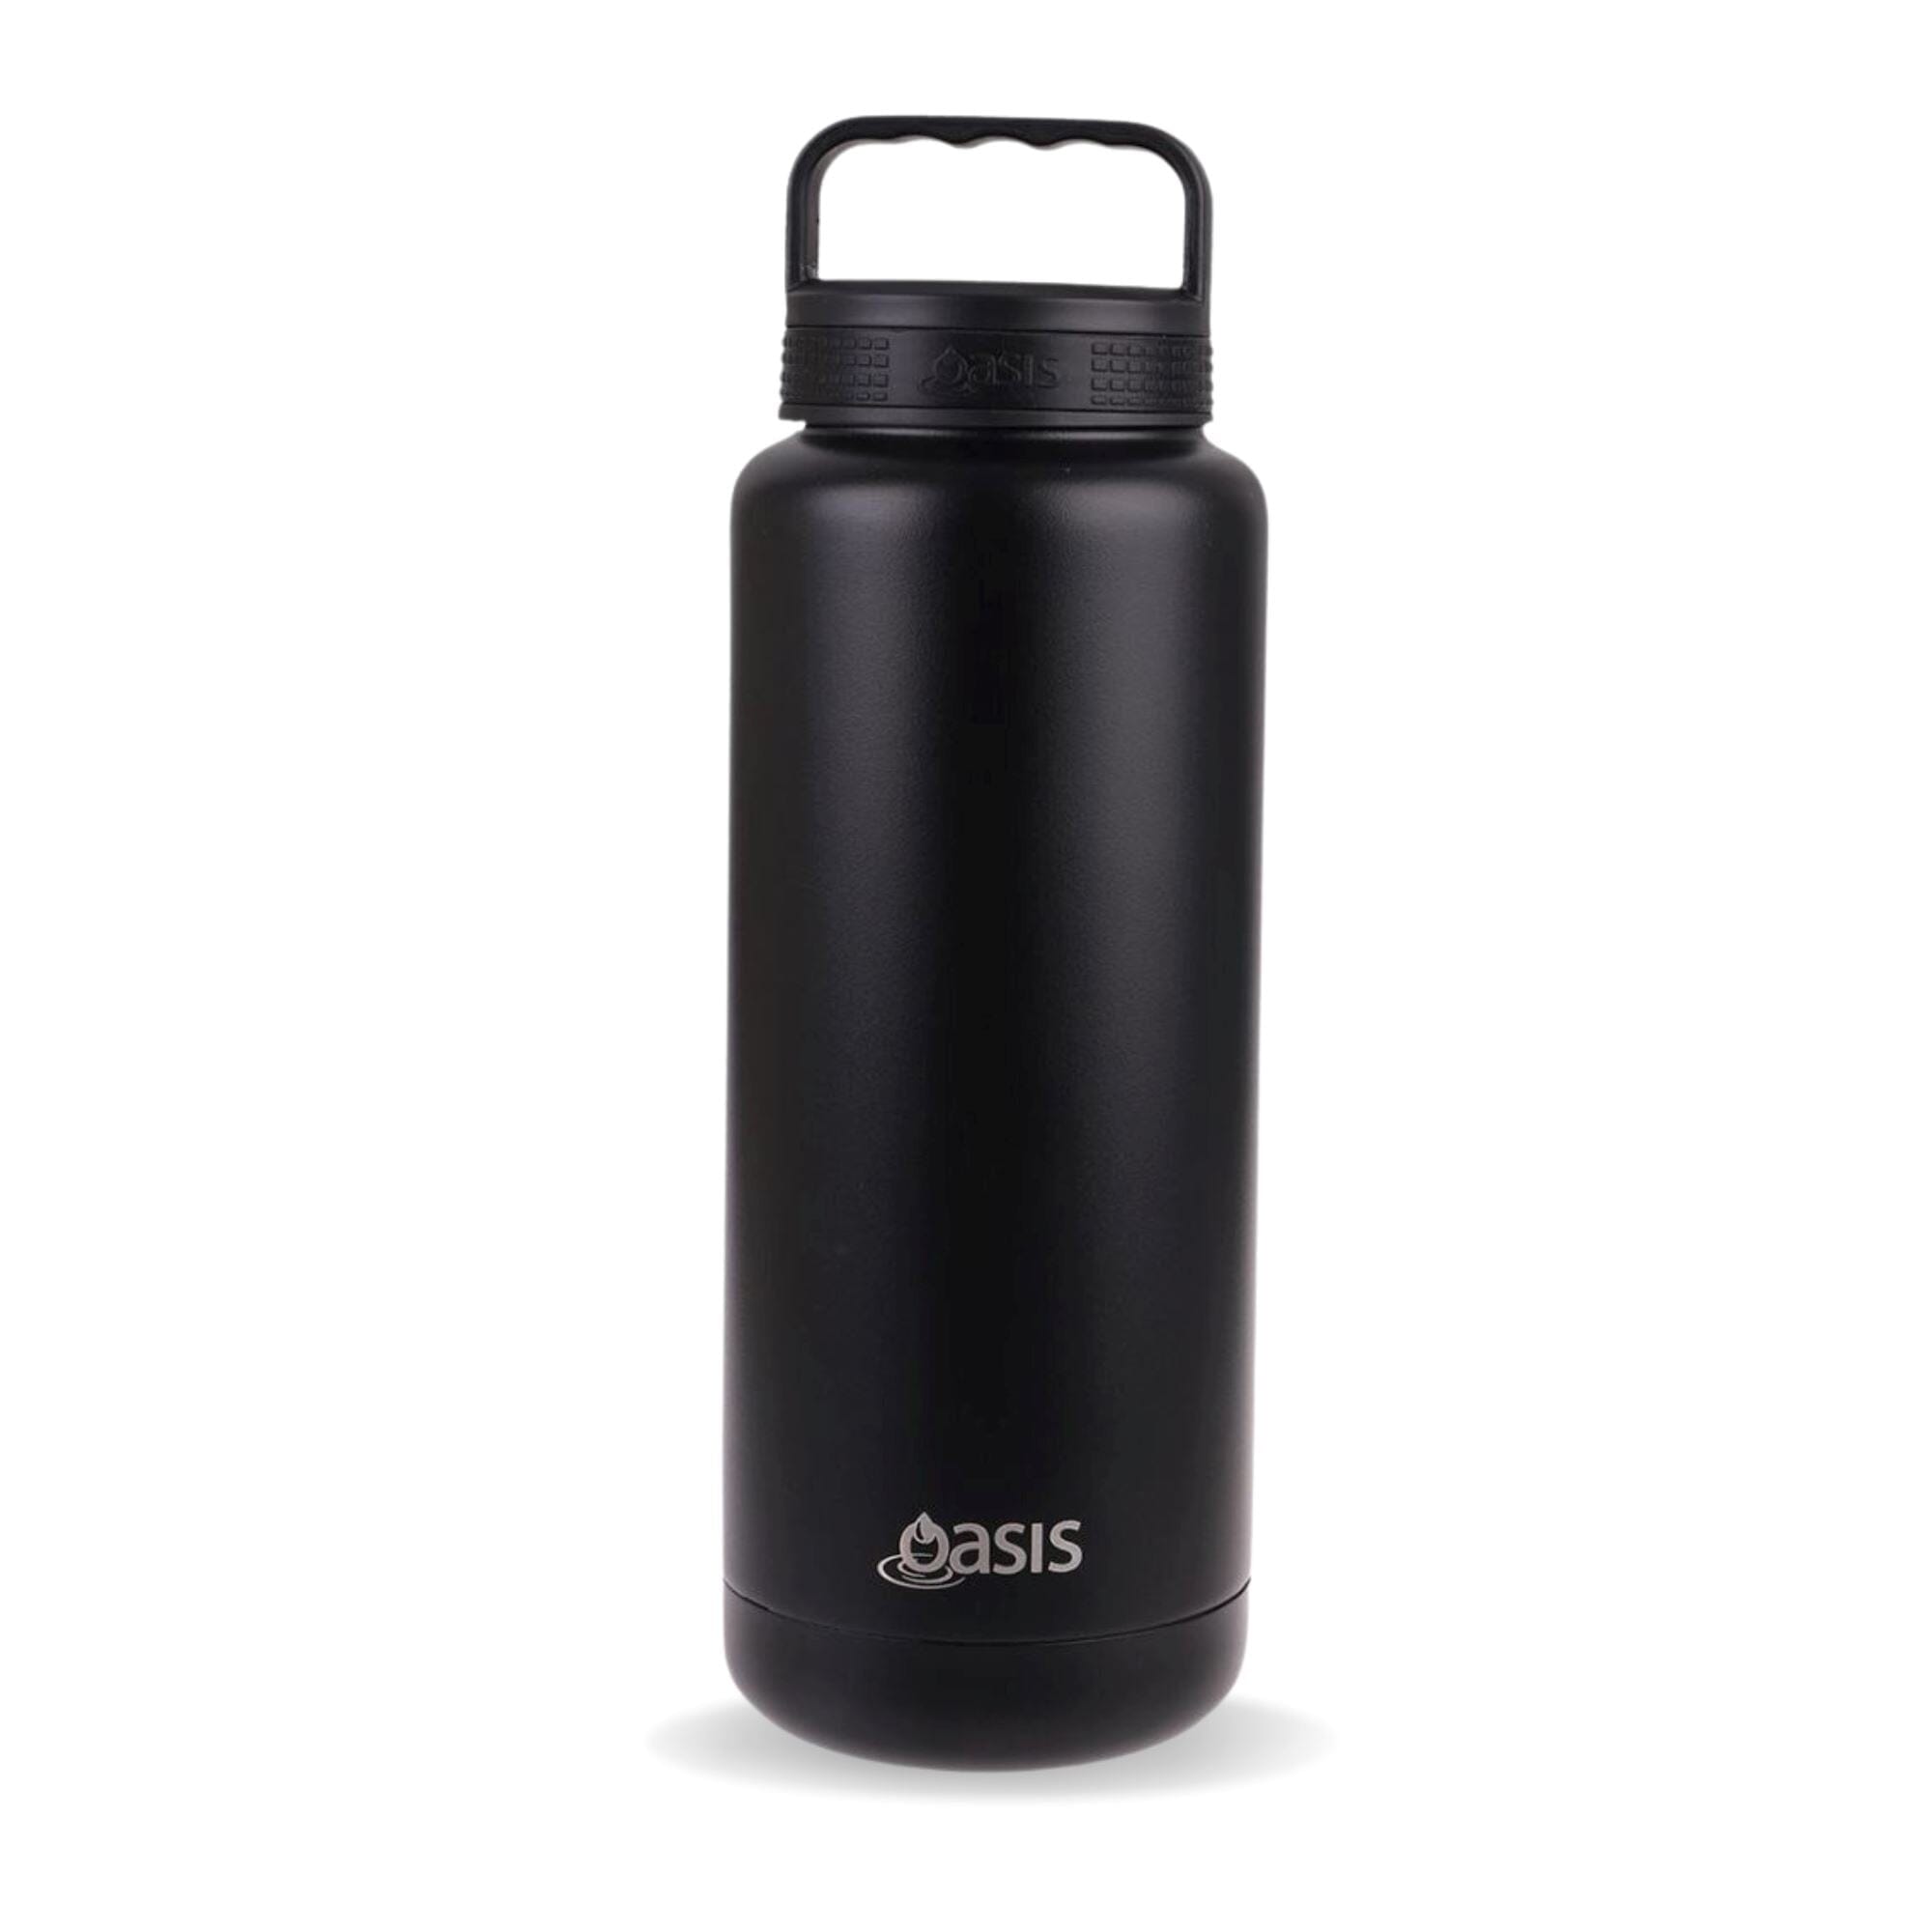 Insulated Titan Black Water Bottle 1.2 Litre Insulated Water Bottle Oasis 